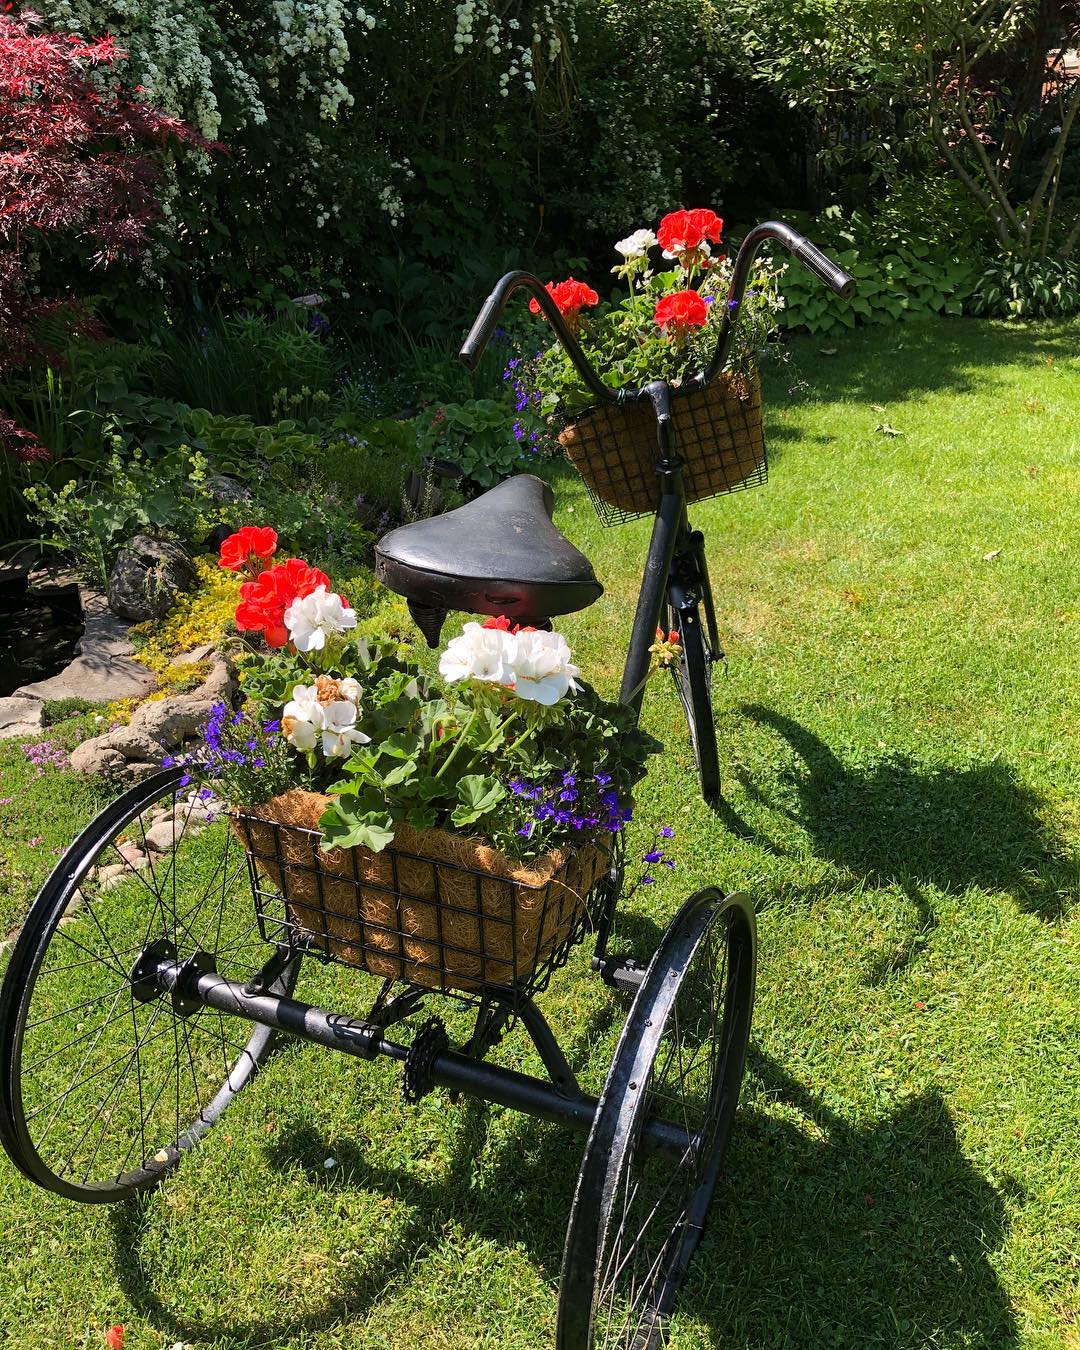 Bike with baskets of red flowers on them.